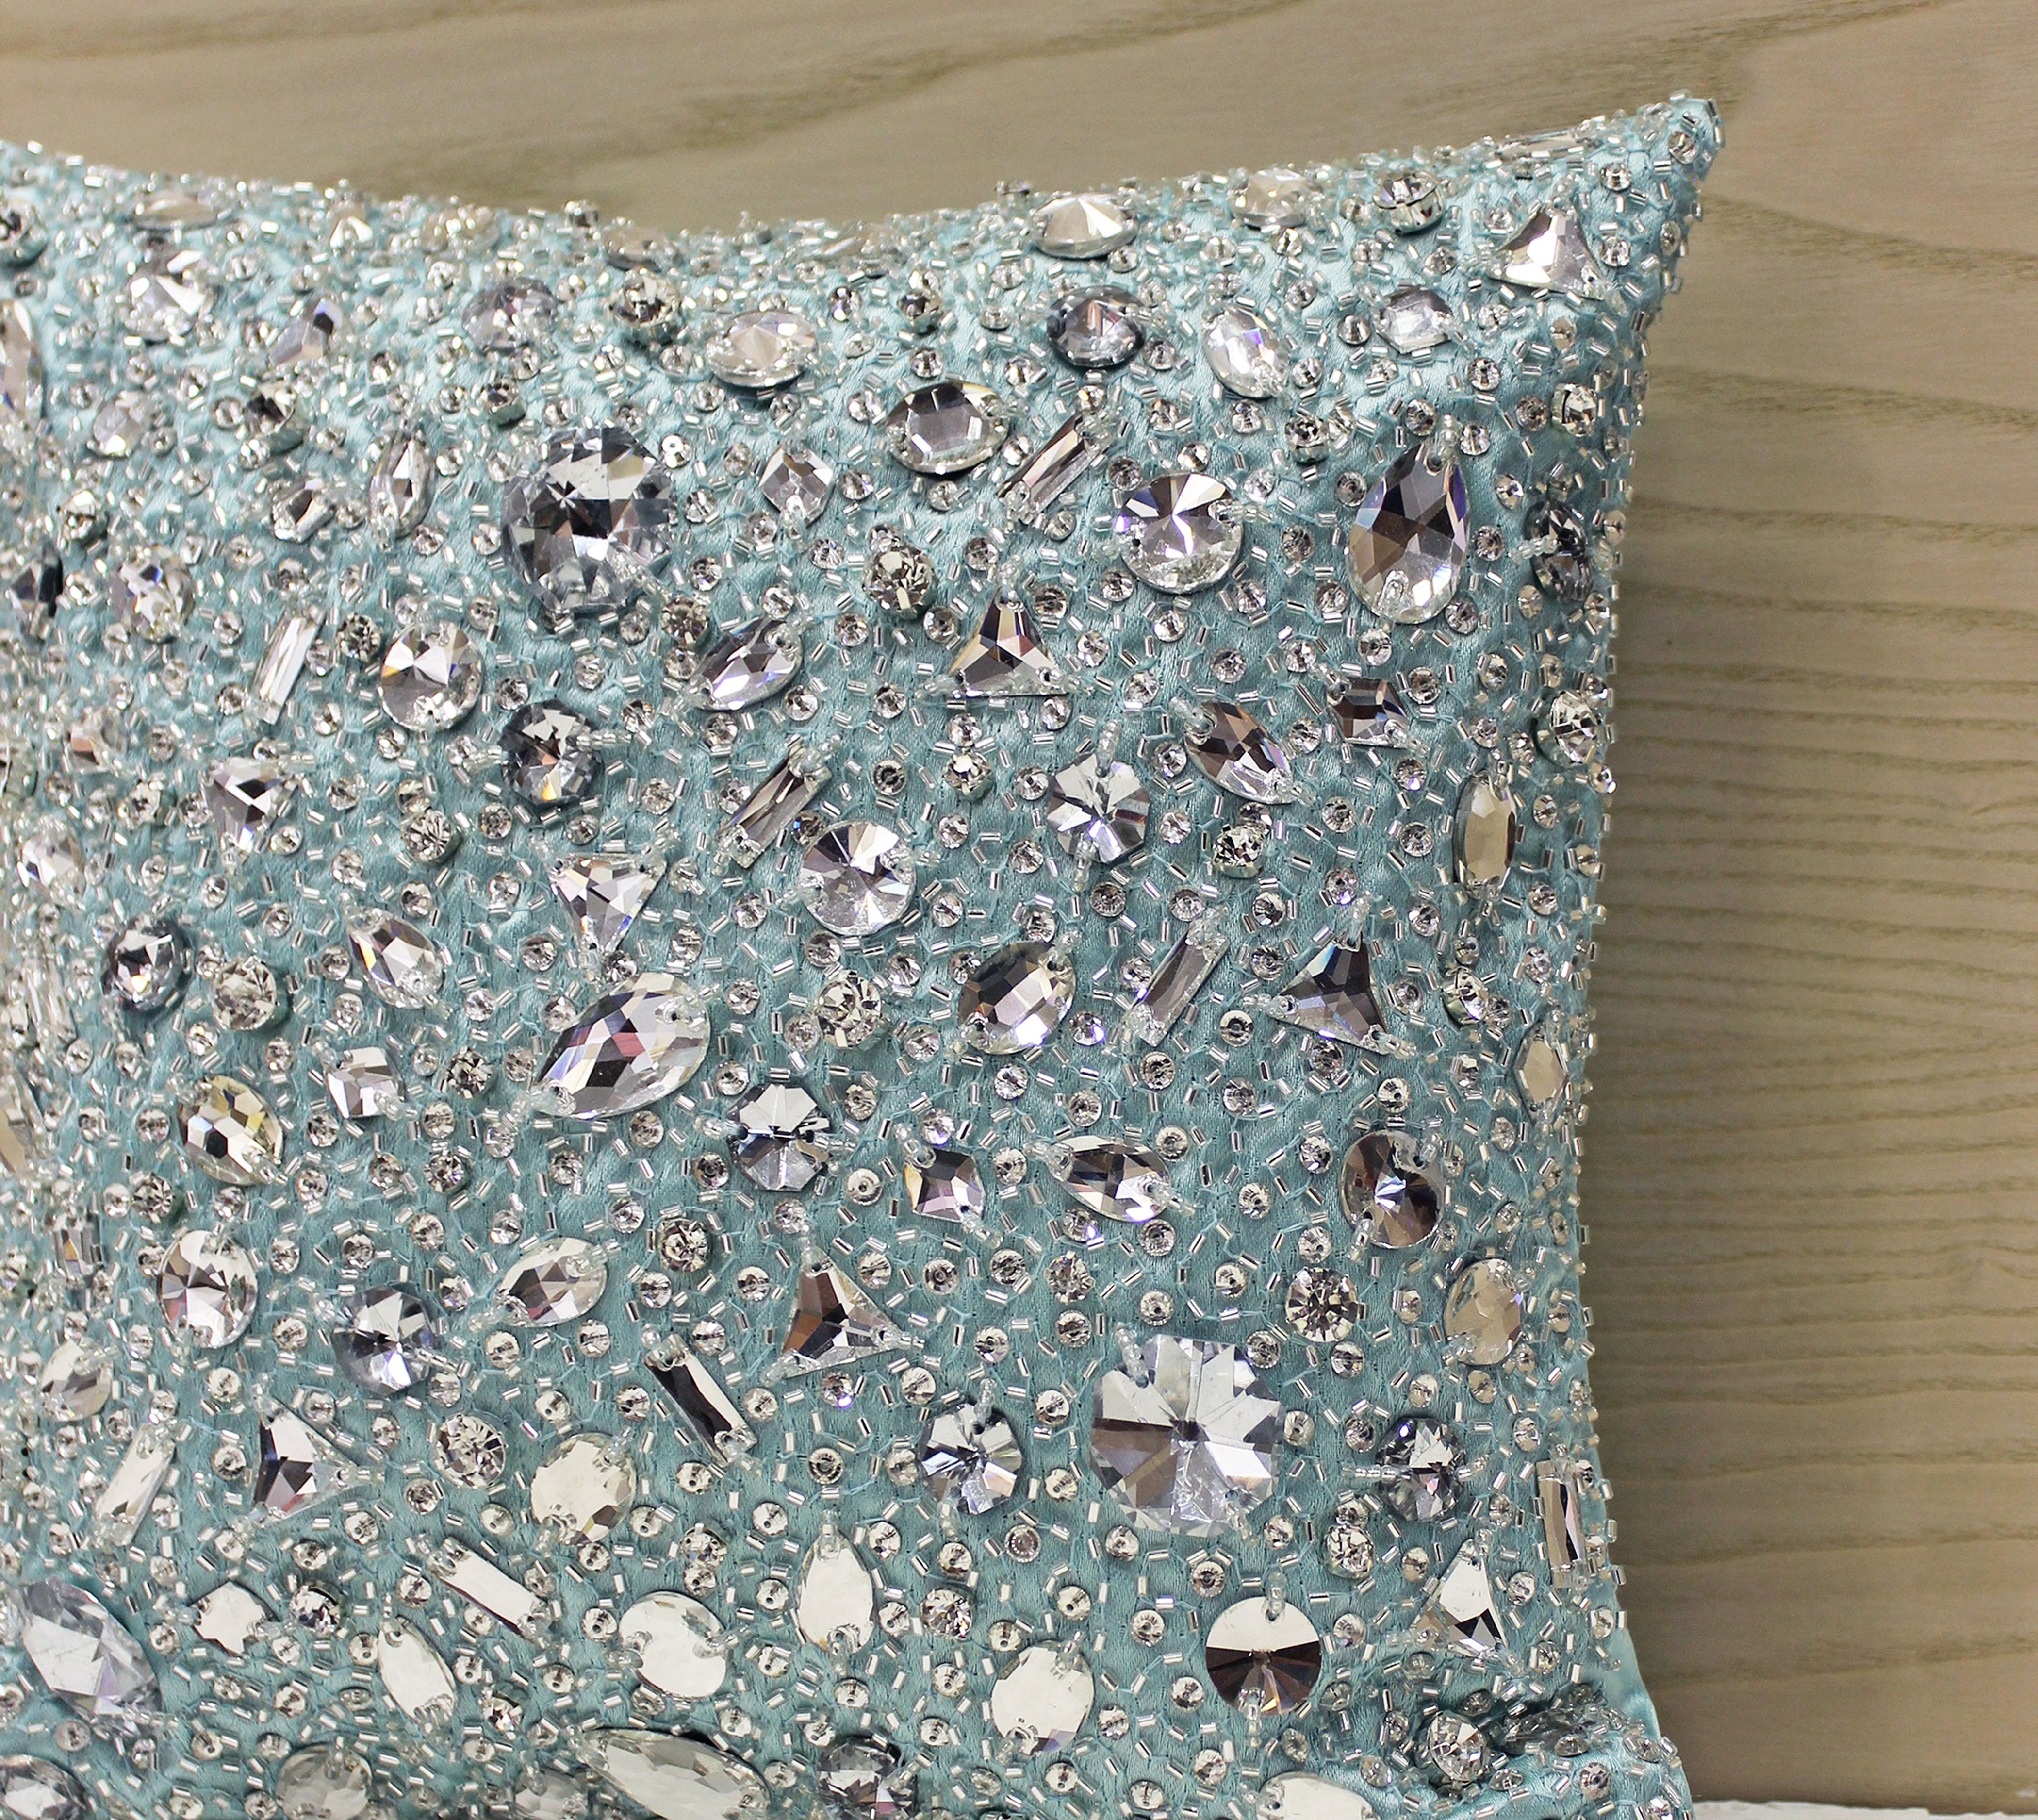 FORTUNE Light Blue and Silver Bling Cushion Cover